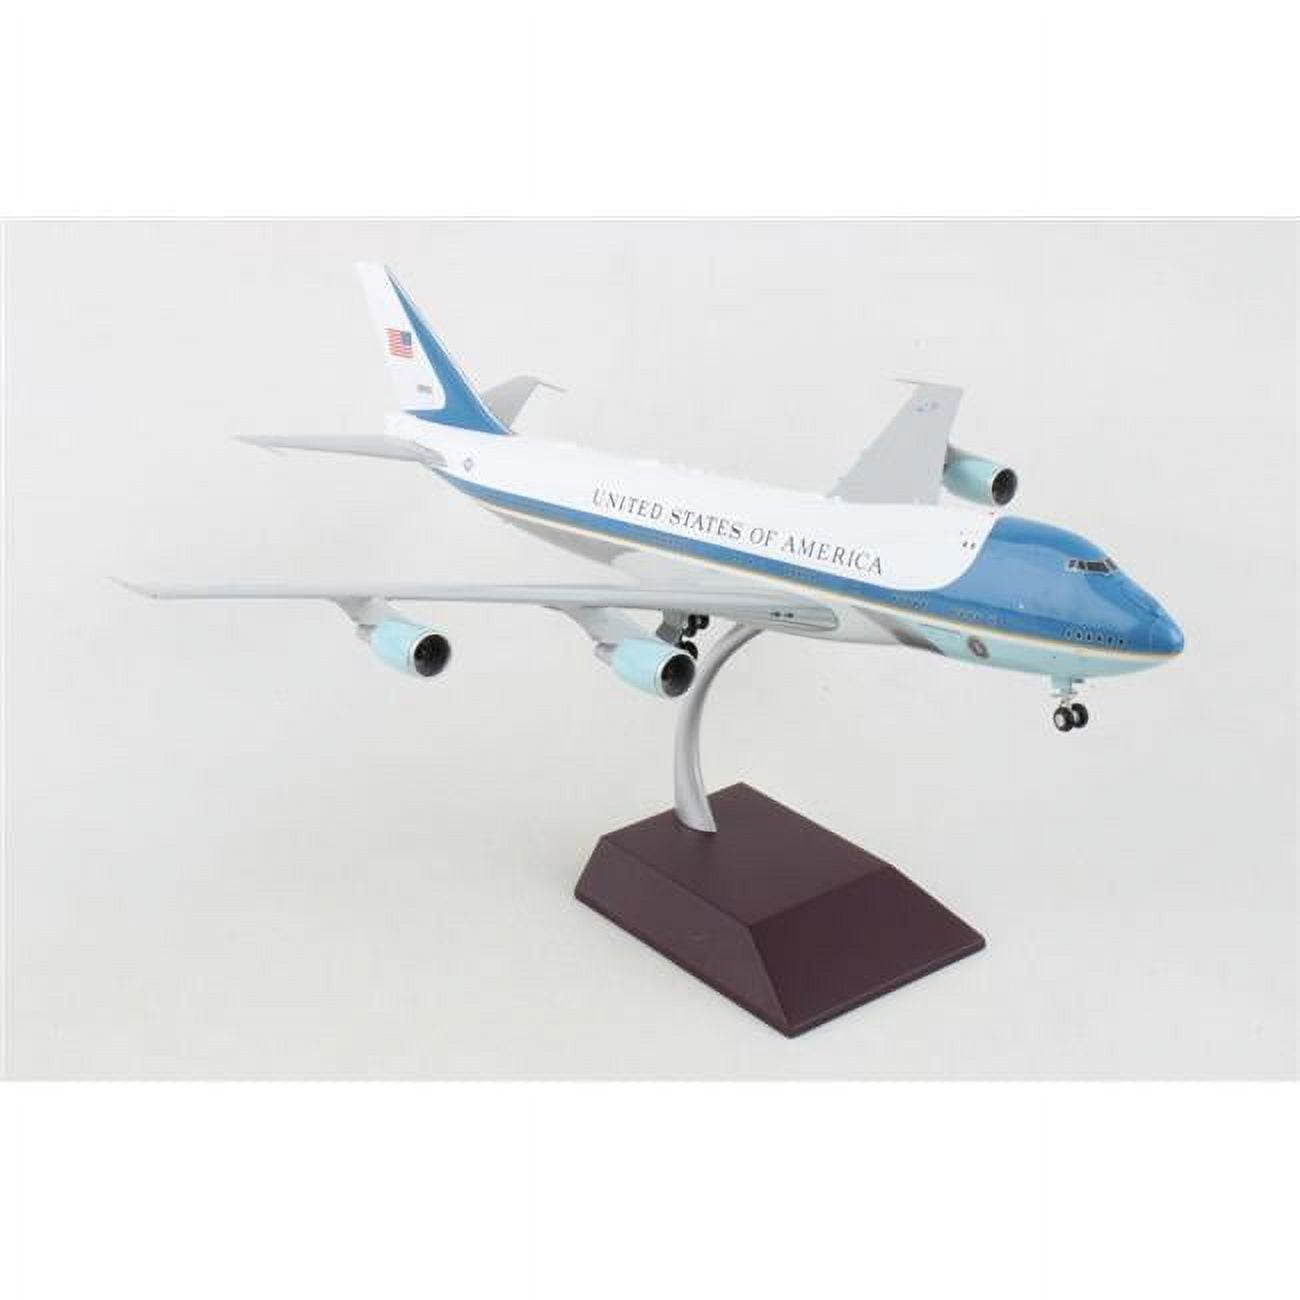 ThinkandPlay 1-200 Scale Reg No. 82-8000 Aircraft Model Plane for Air Force One B747-200